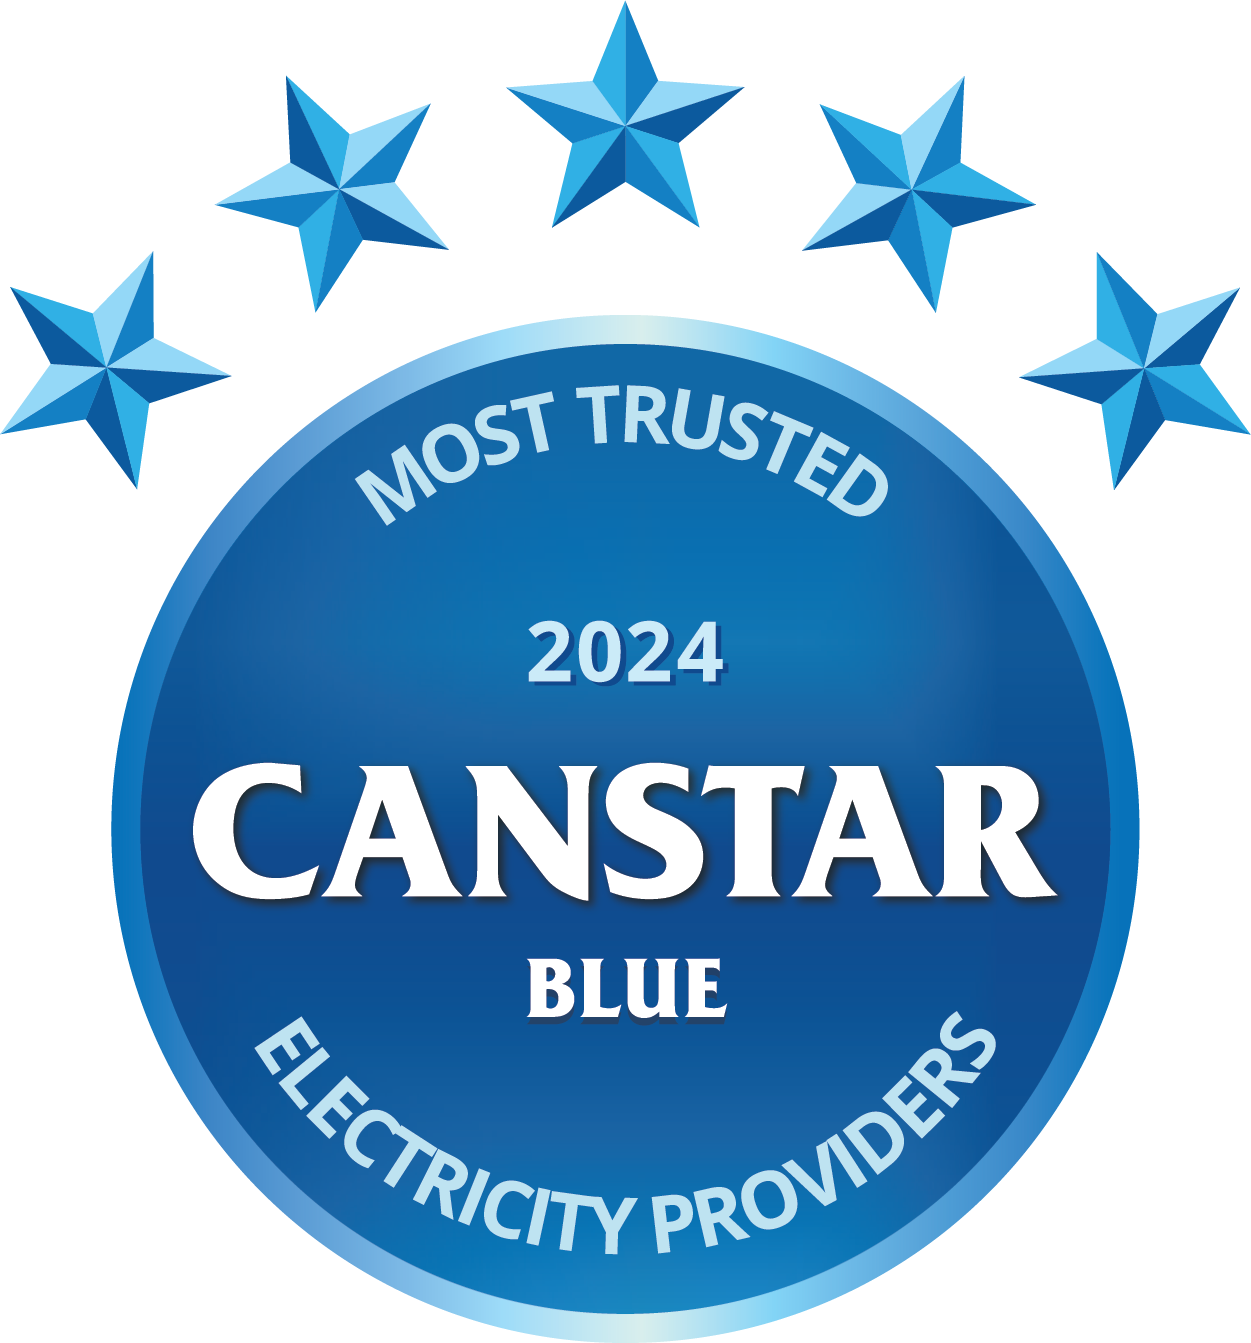 Most trusted electricity provider